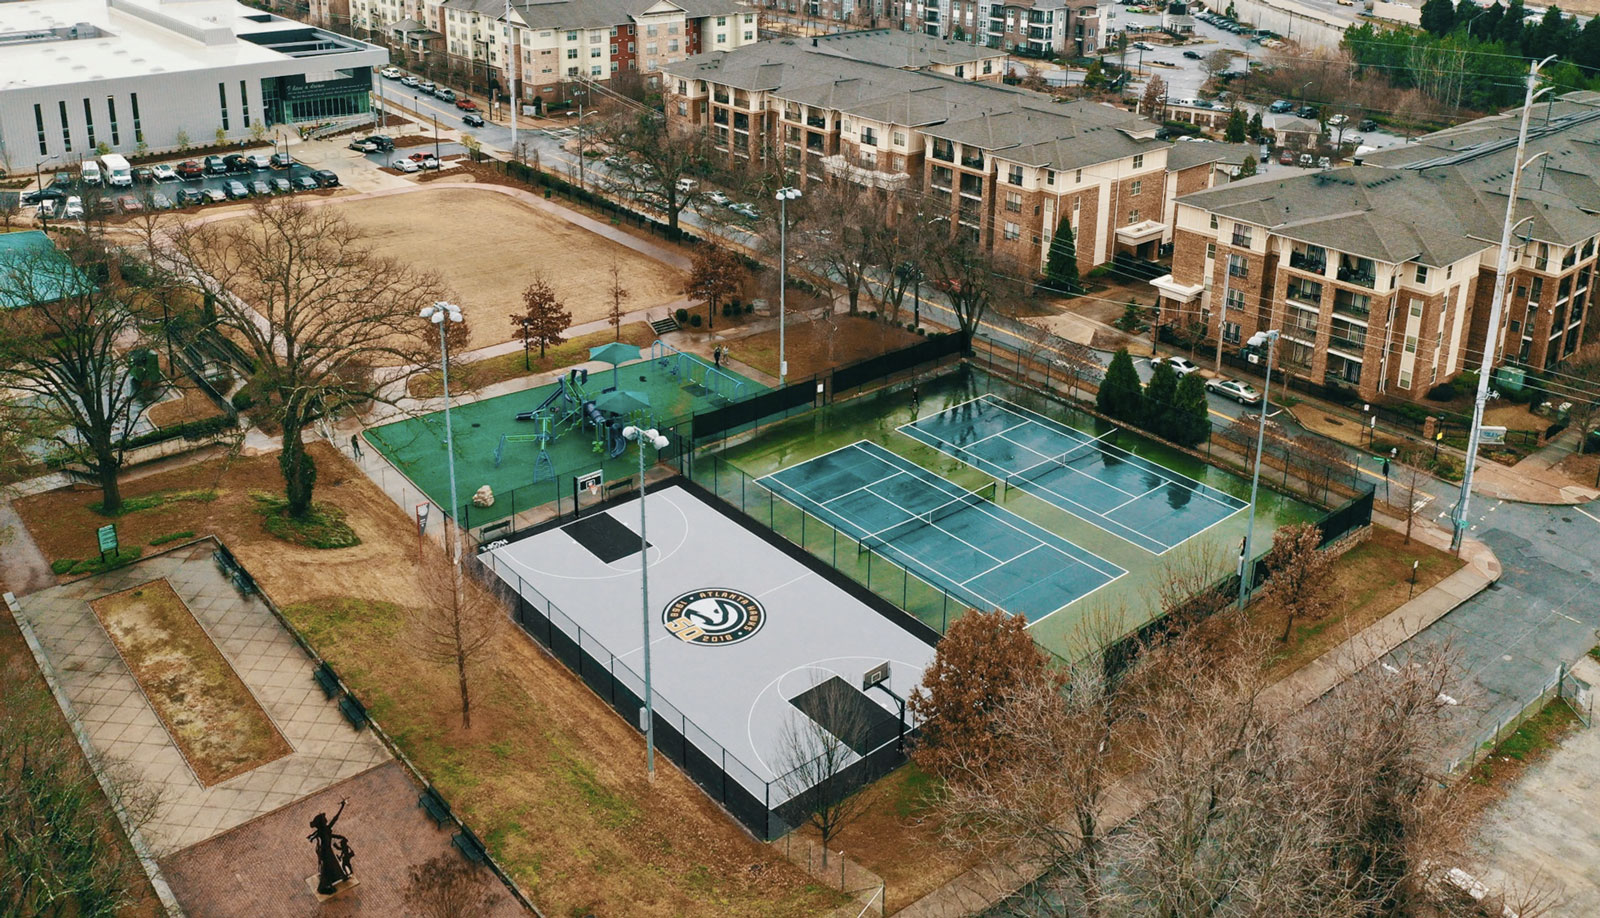 Drone shot of the new basketball court next to the tennis courts and playground